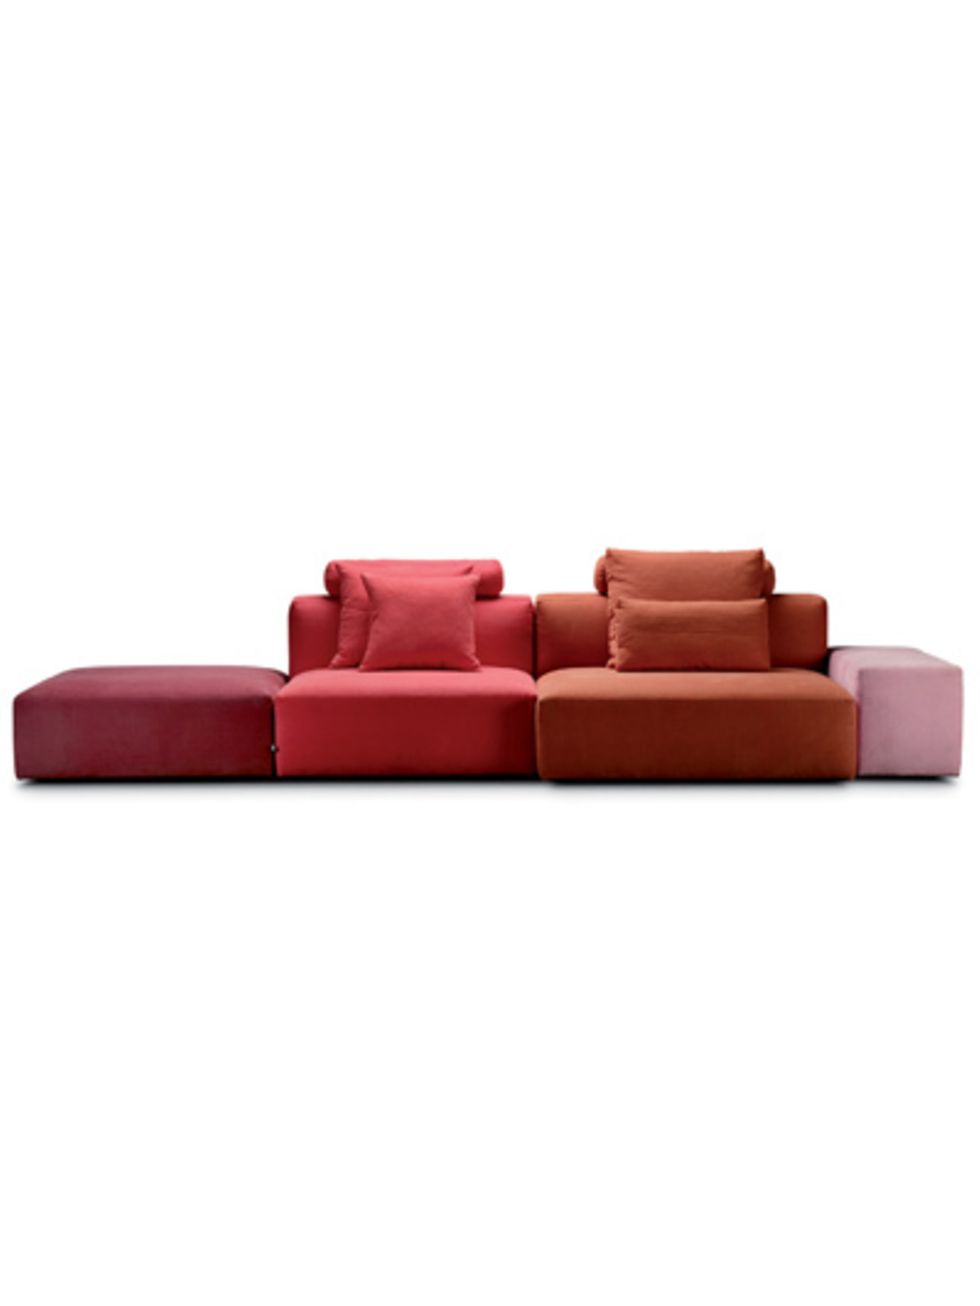 Brown, Maroon, Comfort, Couch, Rectangle, Tan, studio couch, Sofa bed, Living room, Futon pad, 